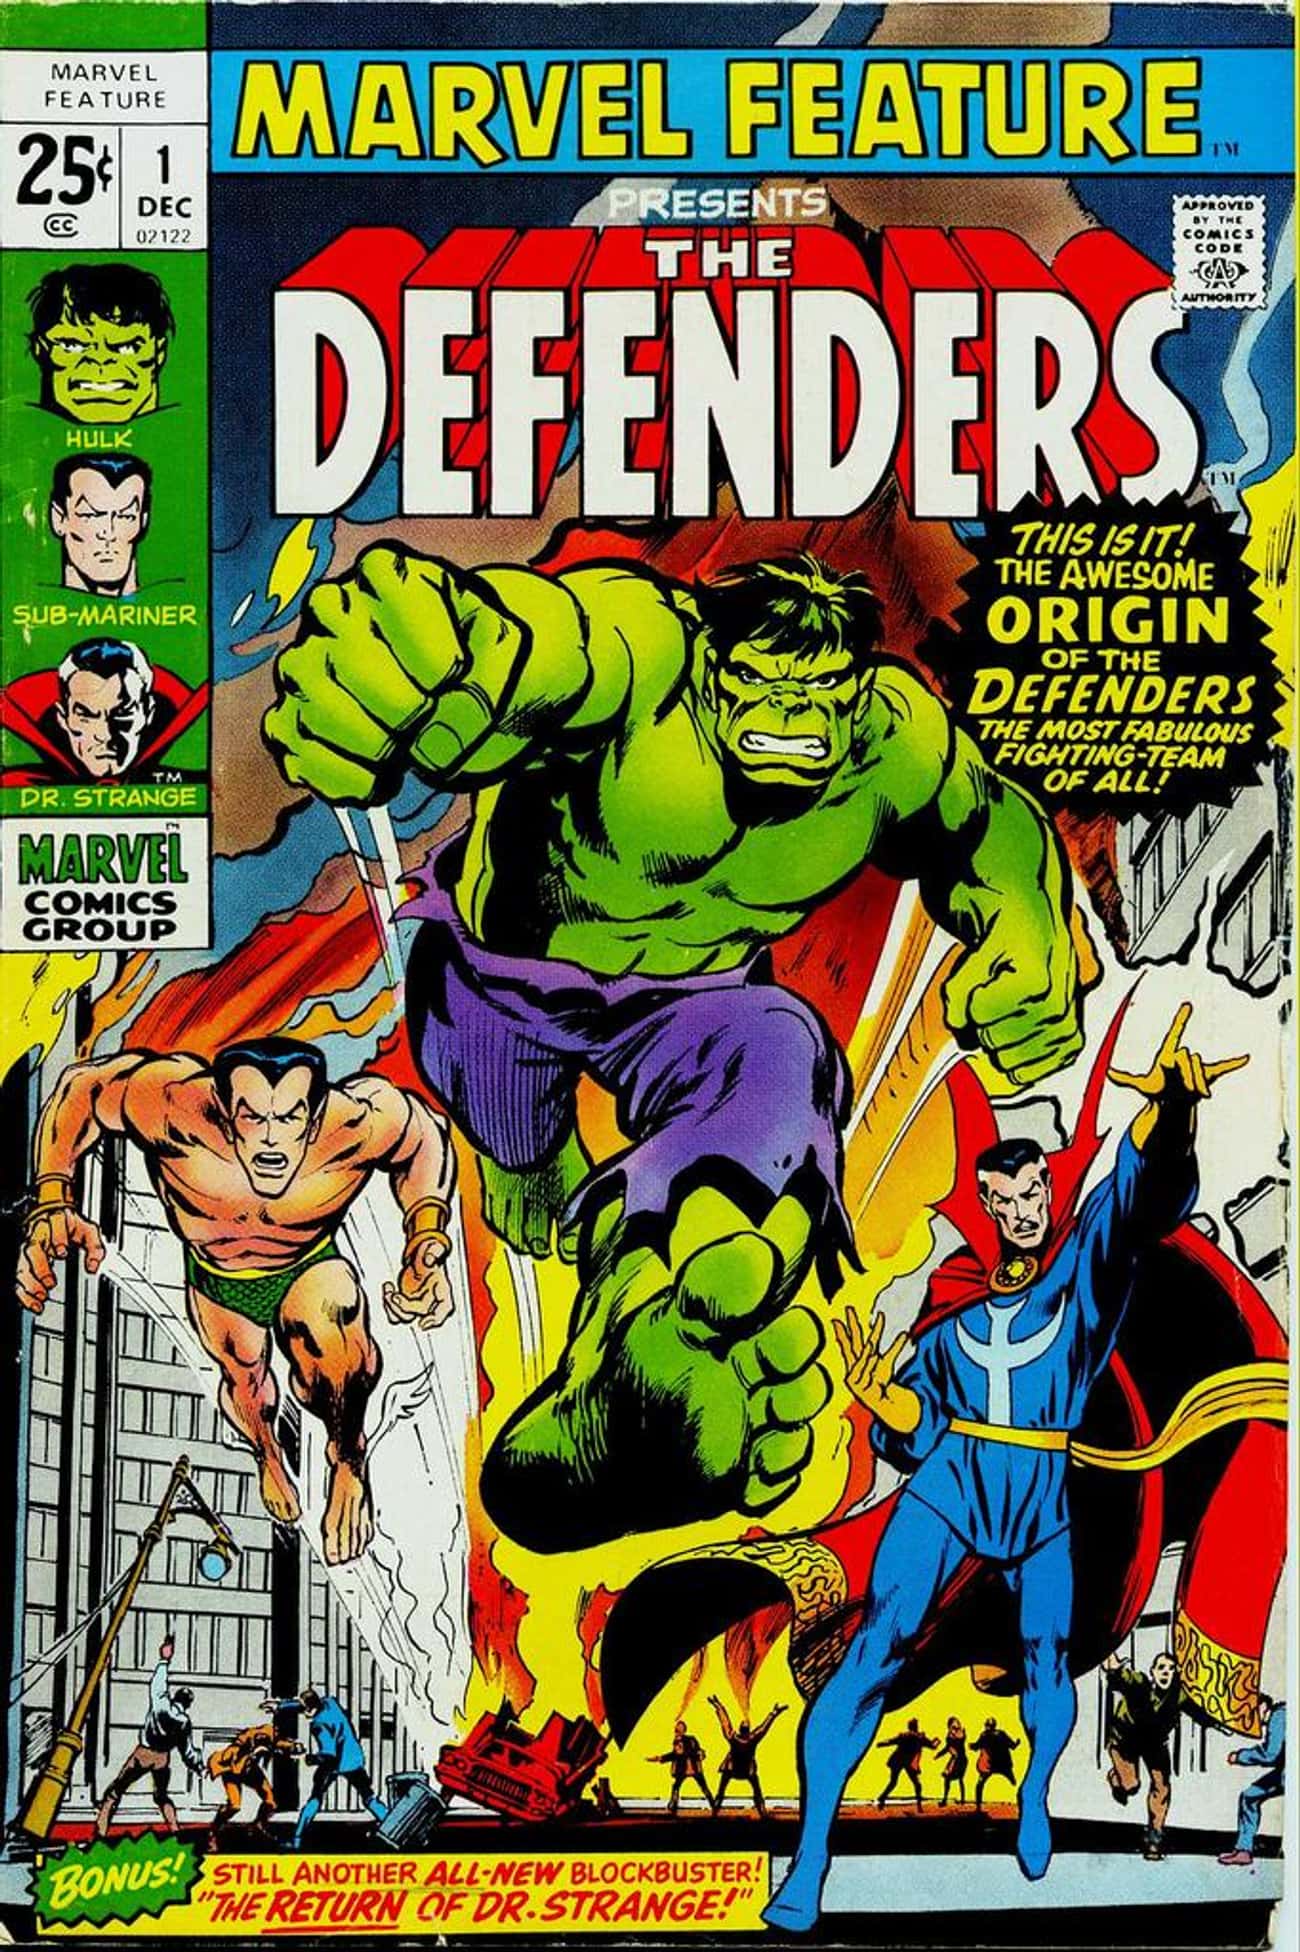 The Defenders Were so Popular in the First Issue of Marvel Feature, They Quickly Got Their Own Title